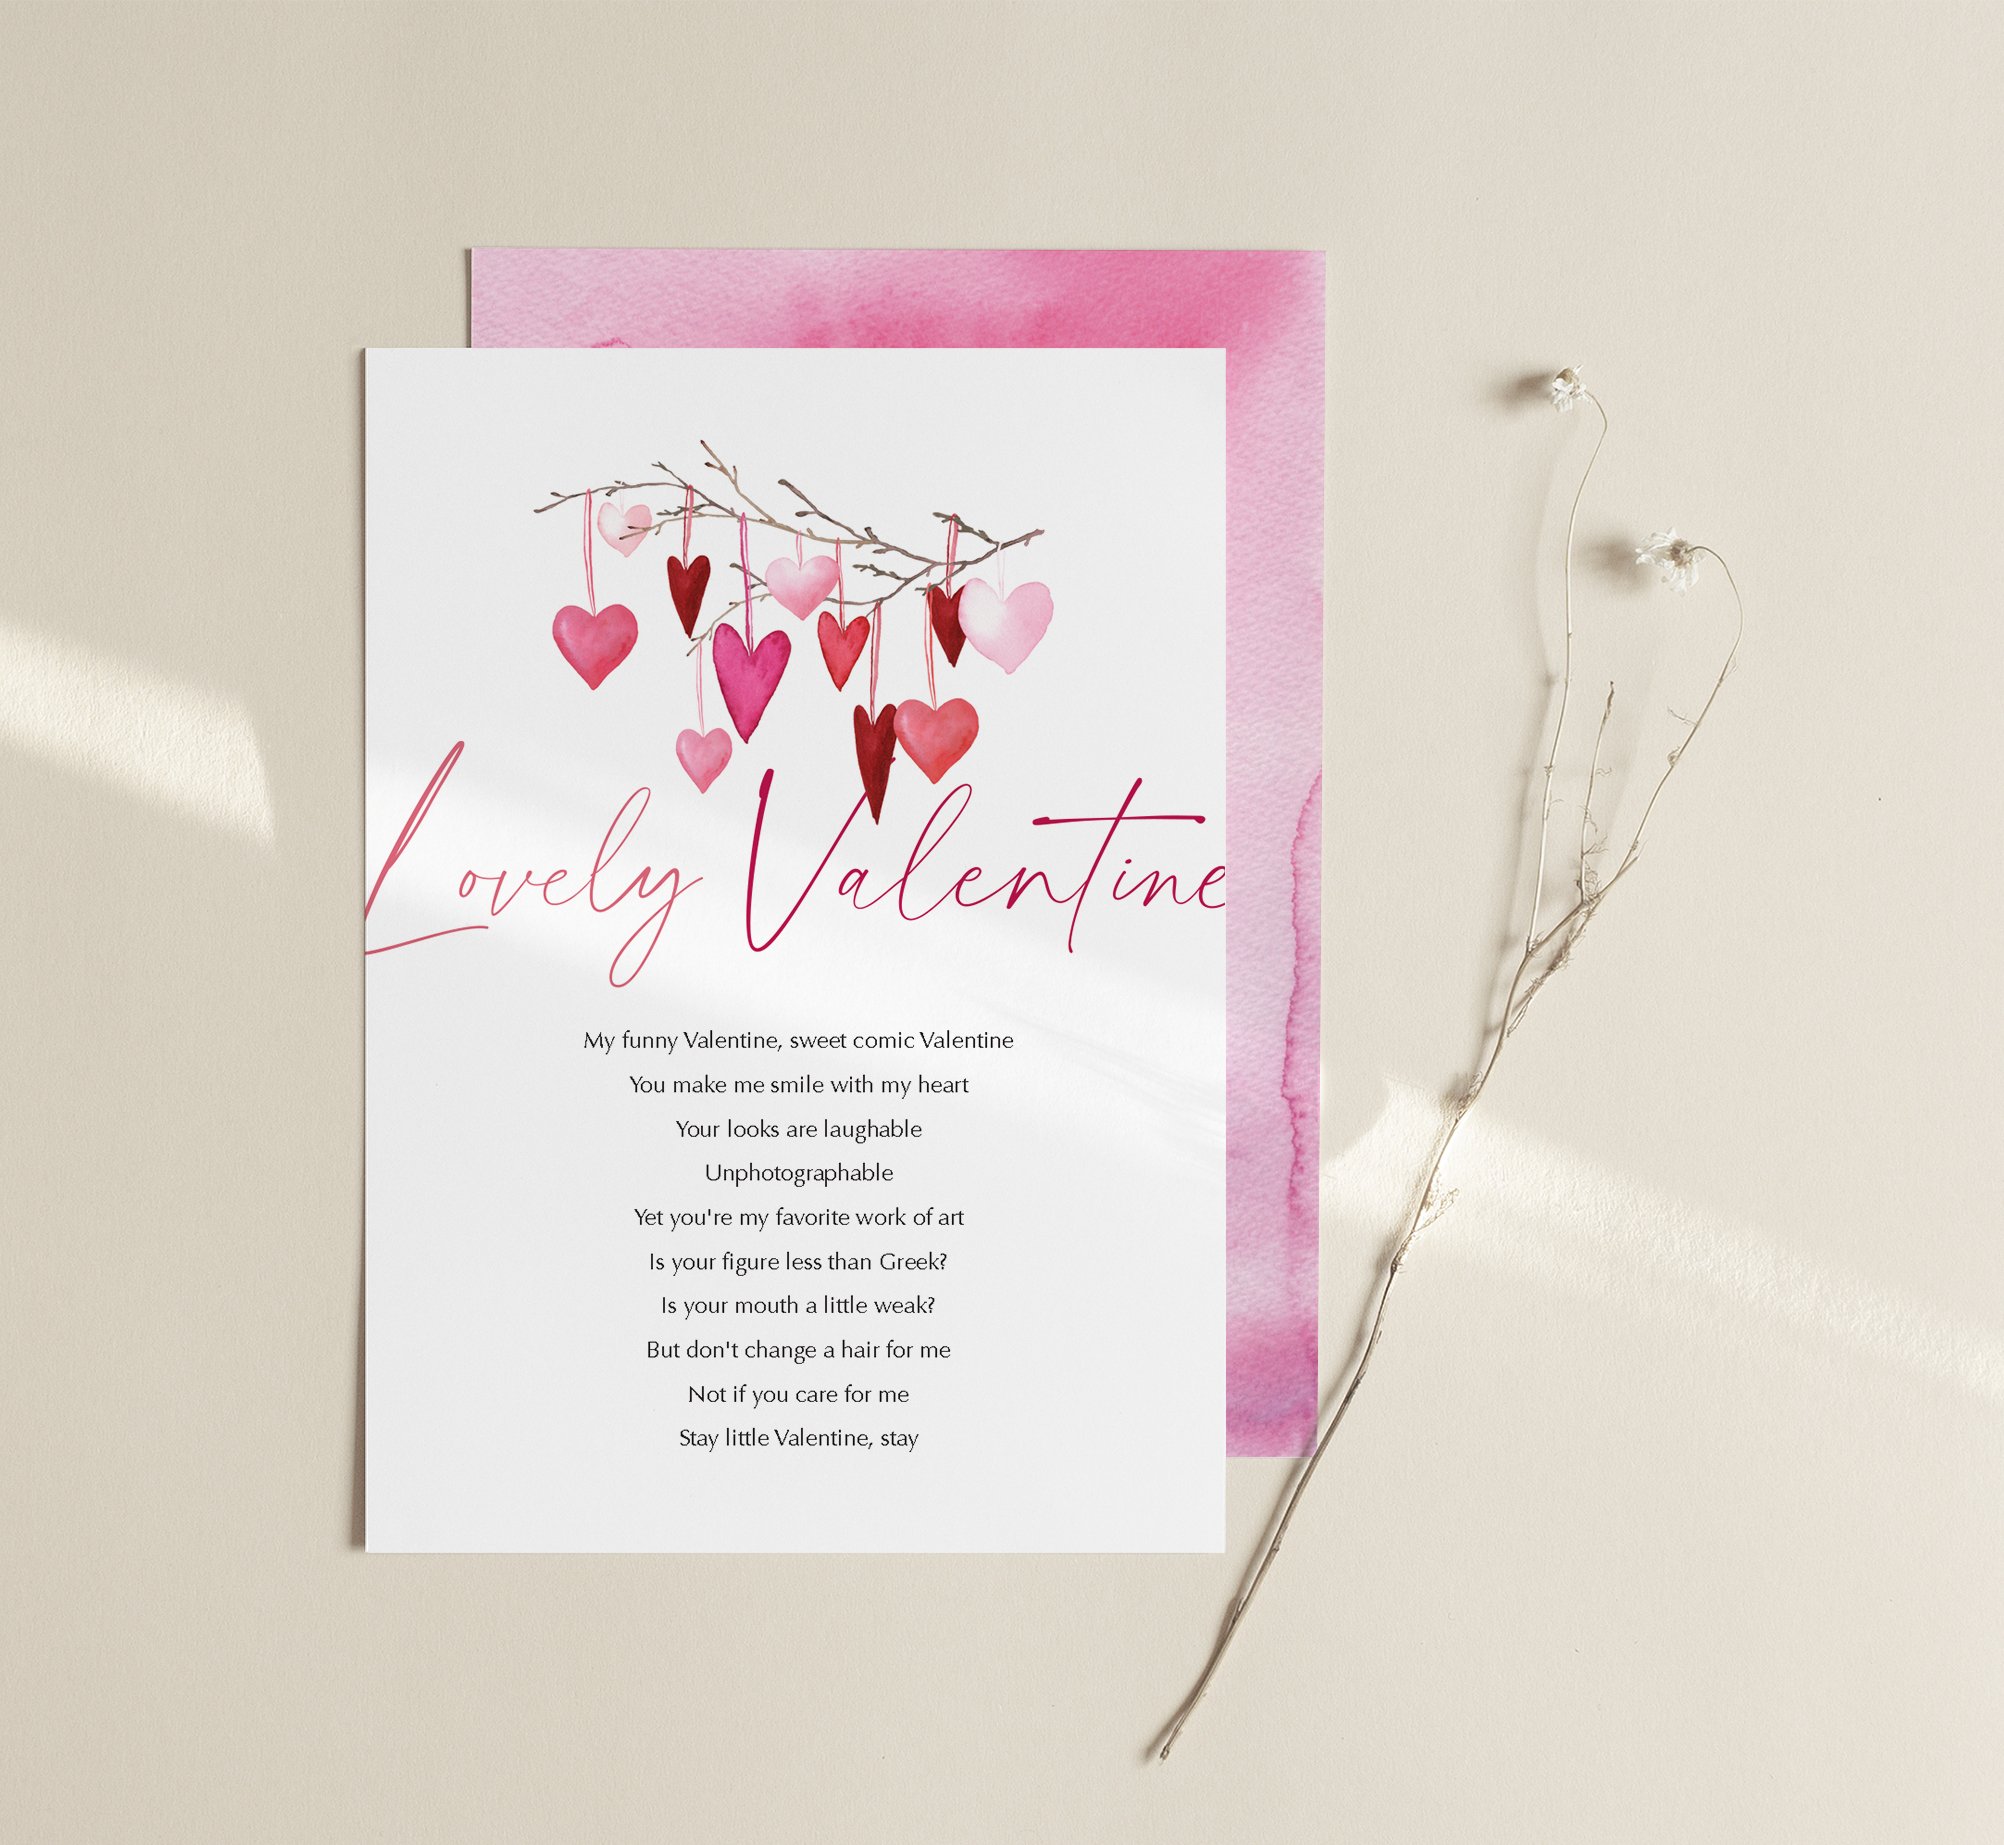 Nice pink invitation with flowers and hearts..